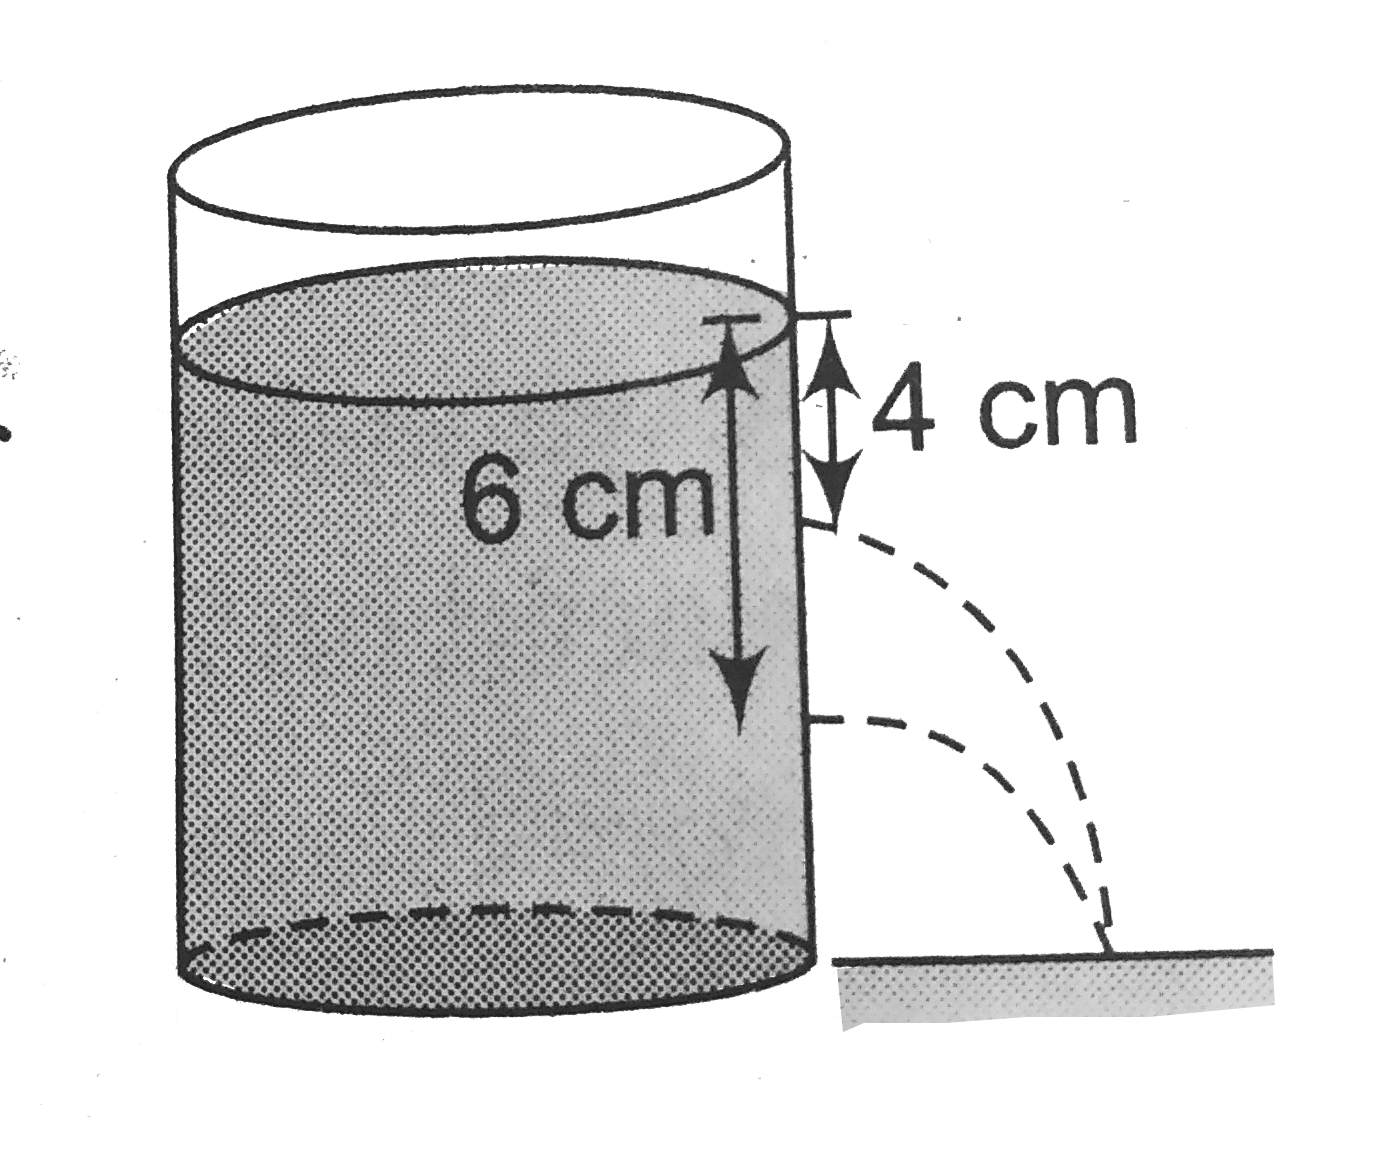 figure shows two holes in a wide tank containing a liquid common. The water streams coming out of these holes strike the ground at the same point. The heigth of liquid column in the tank is